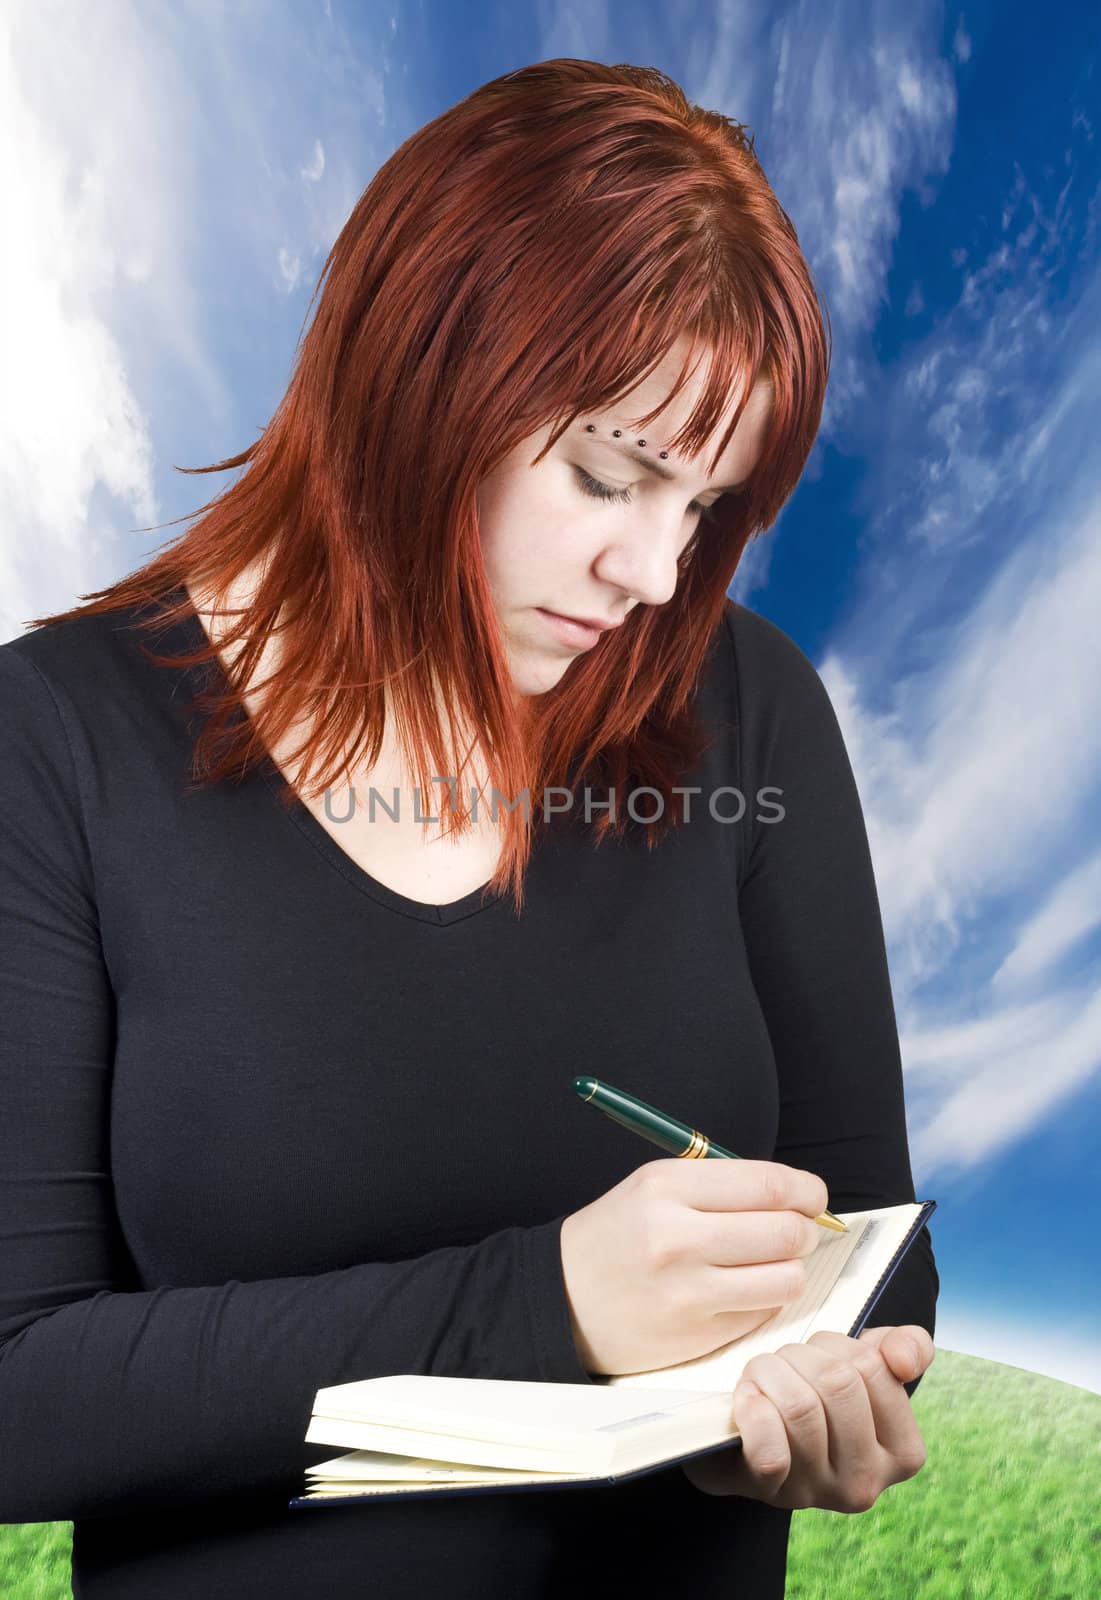 Cute redhead writing in her notebook or diary by domencolja